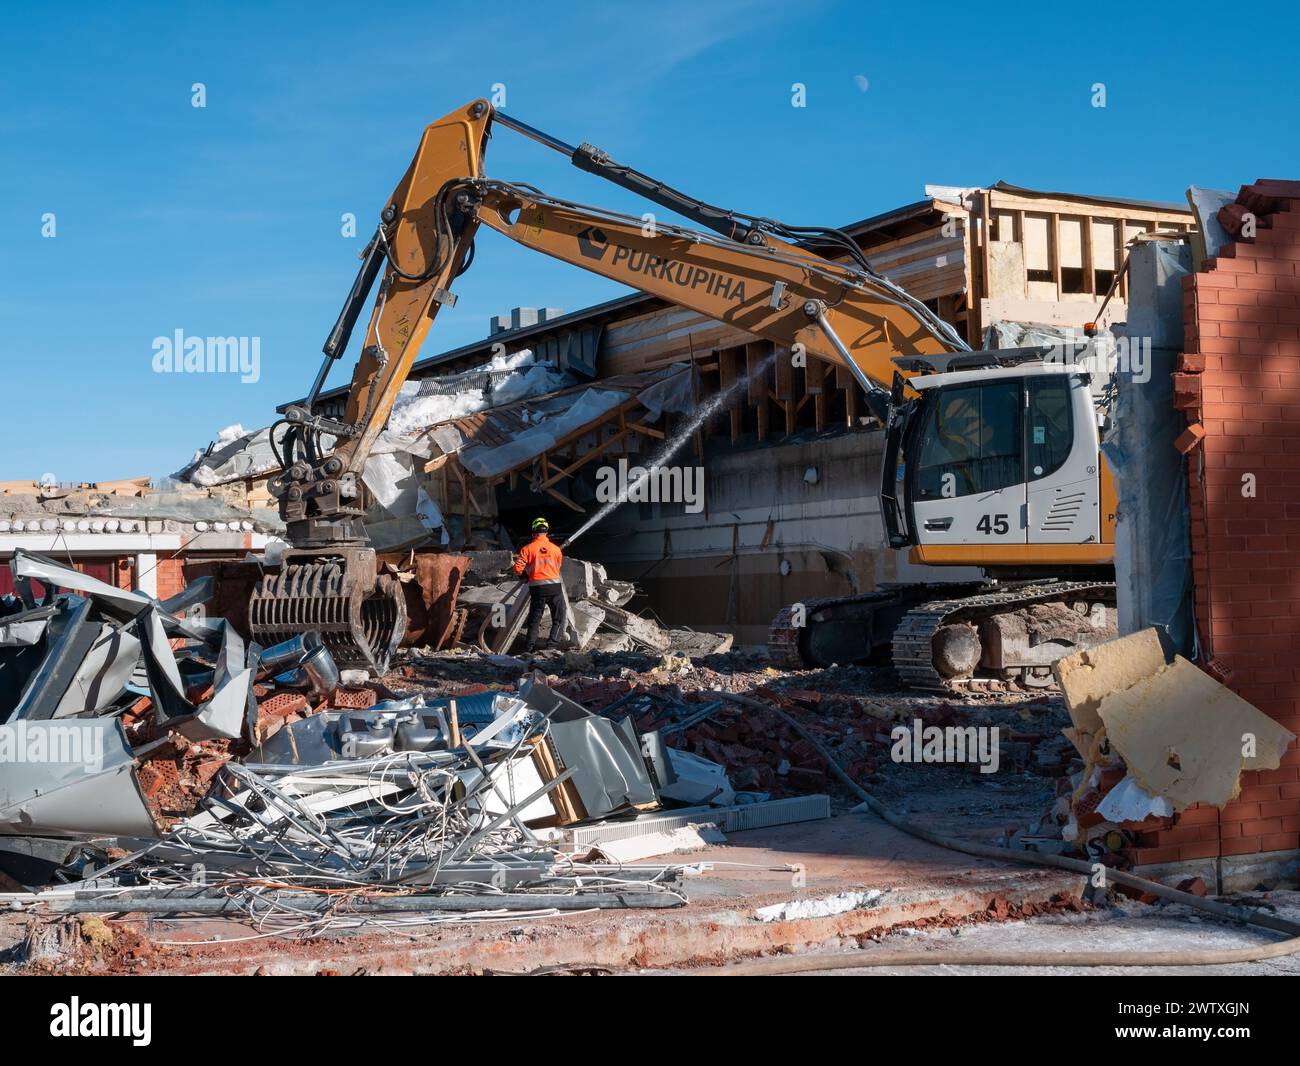 Workman spraying water over a demolition site in Kempele, Finland Stock Photo